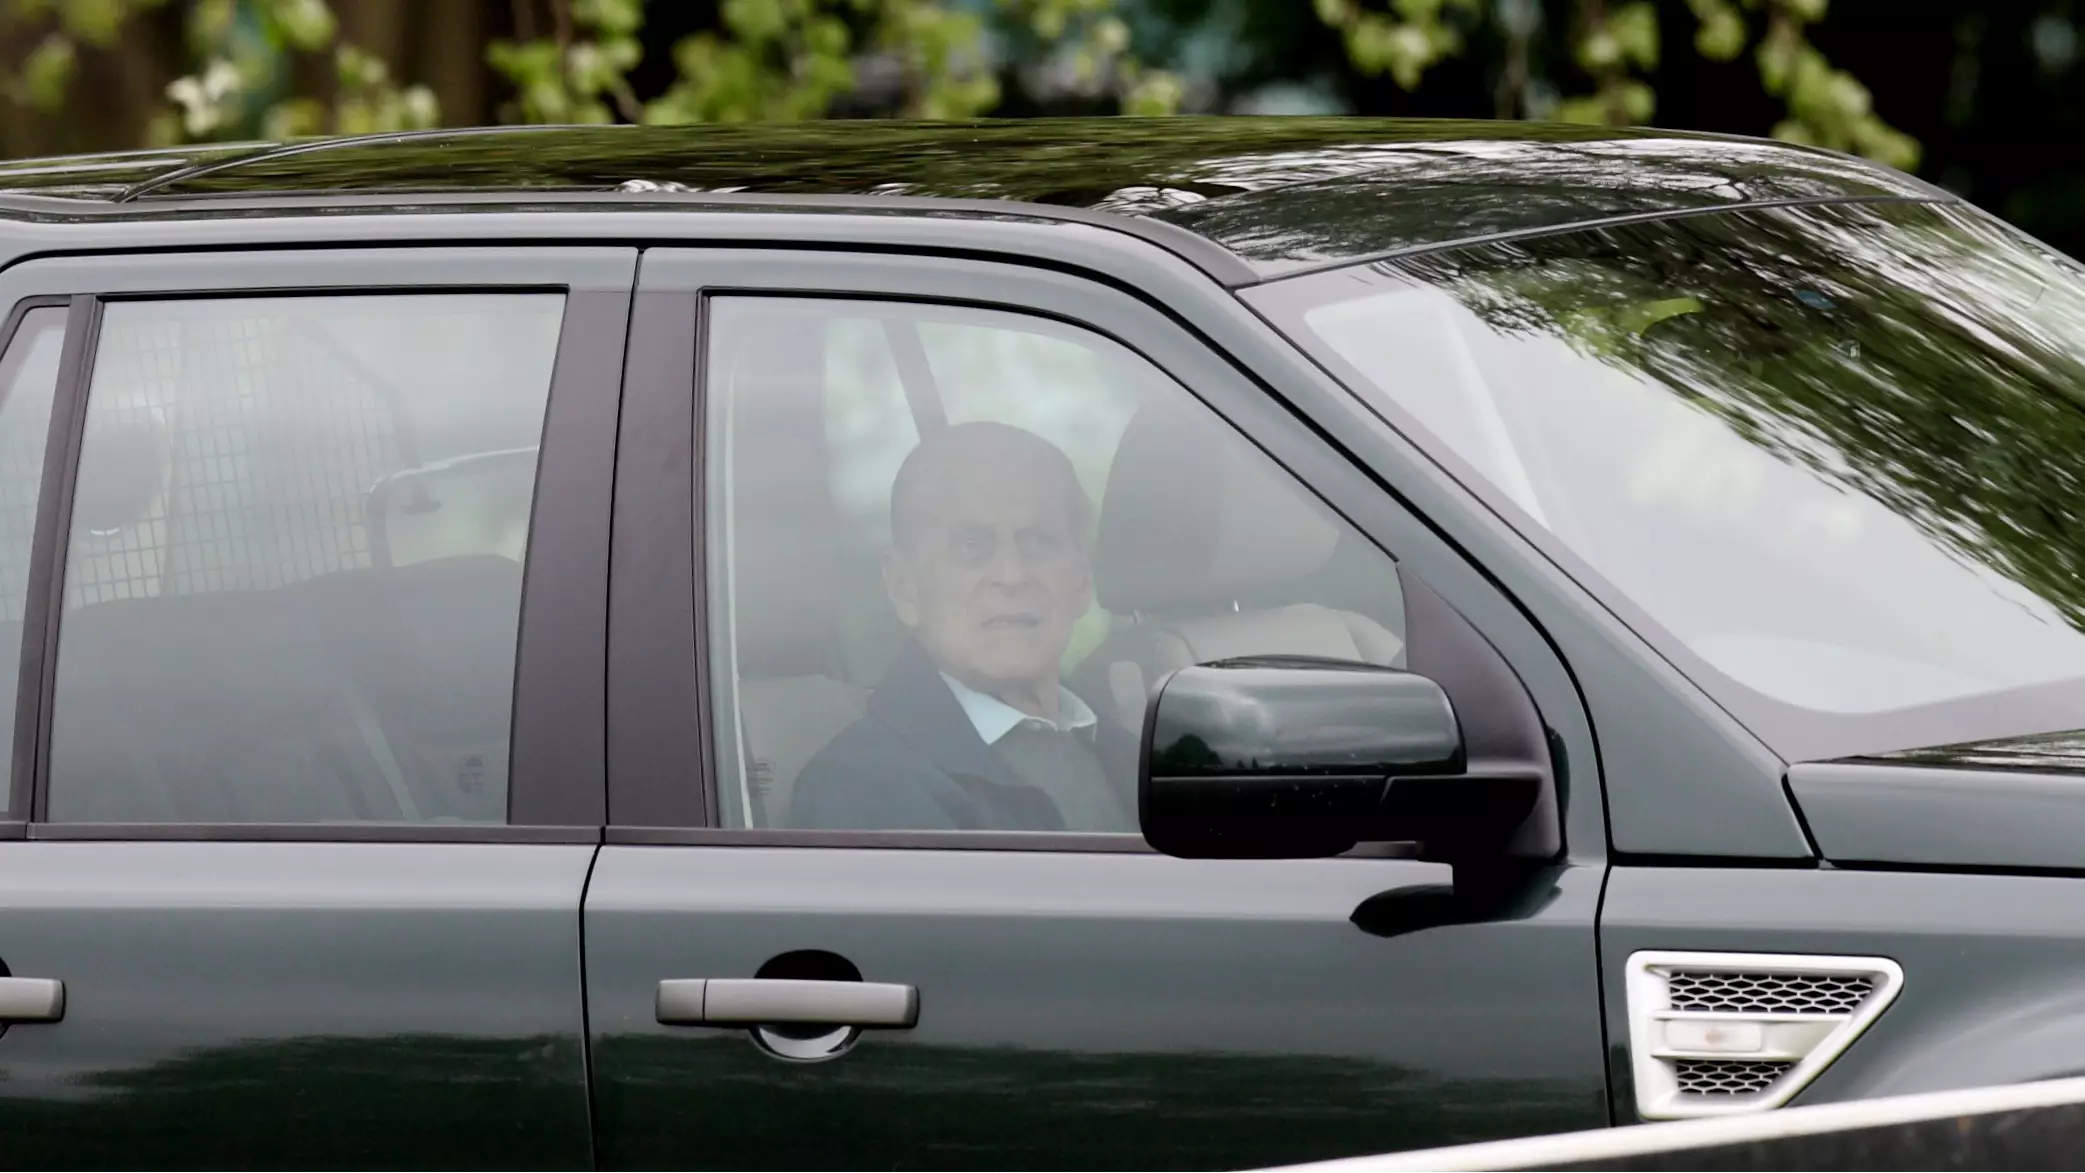 Should Elderly People Still Be Allowed To Get Behind The Wheel?